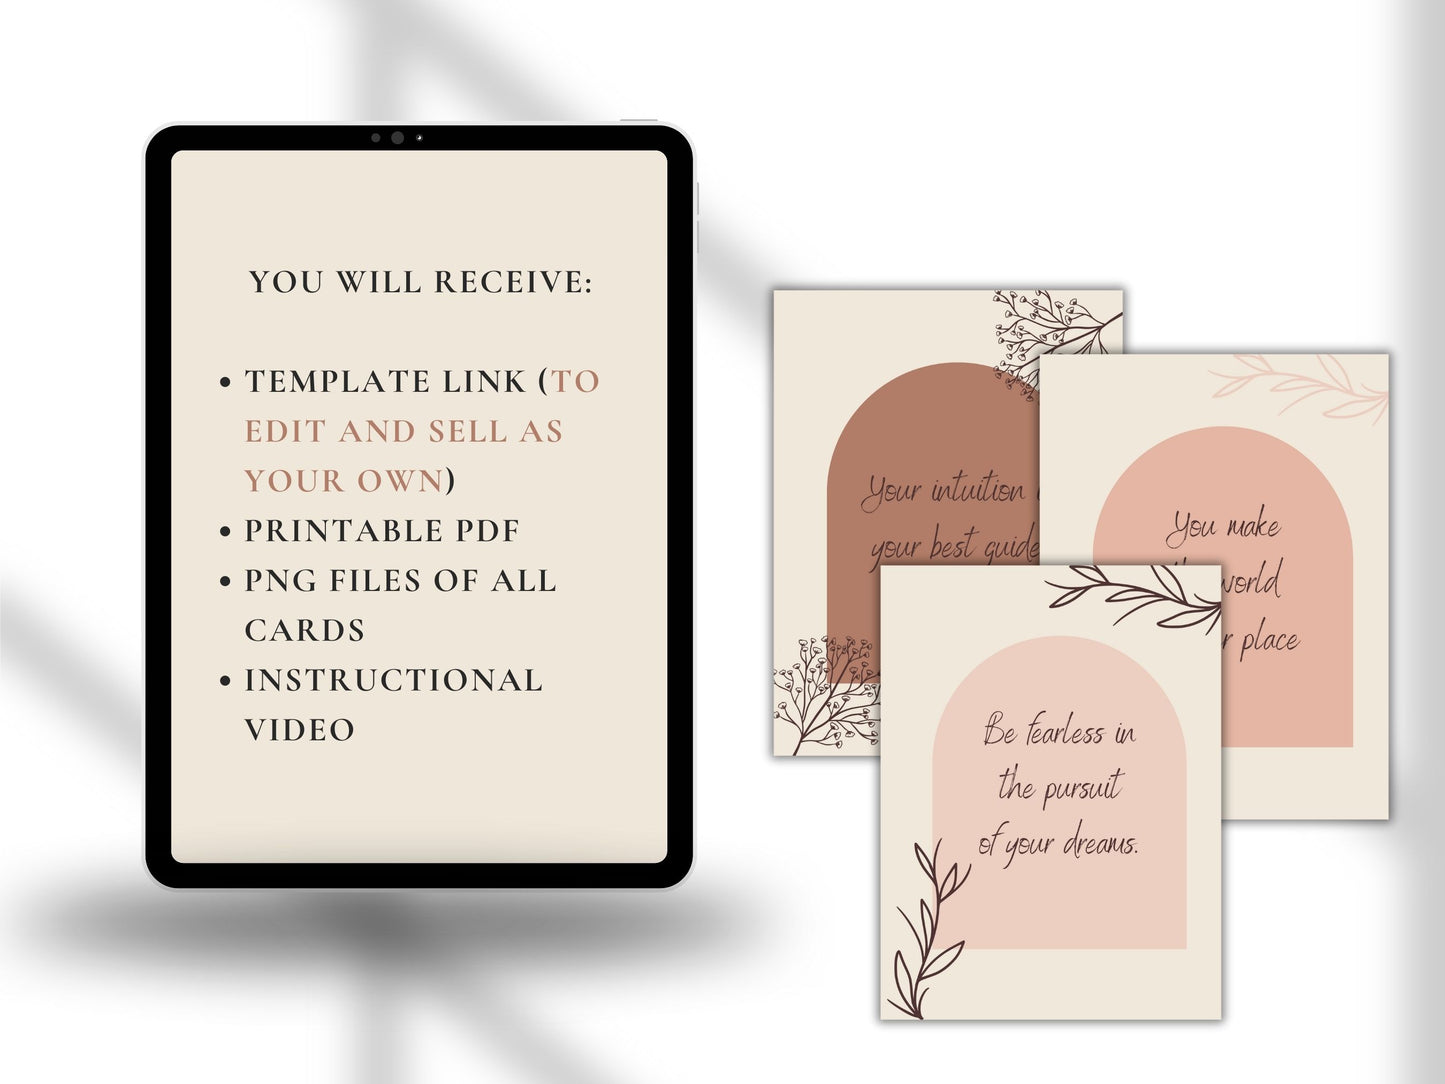 This slide shows what you will receive with this purchase. it includes a template link for editing, a printable pdf, png files and an instructional video